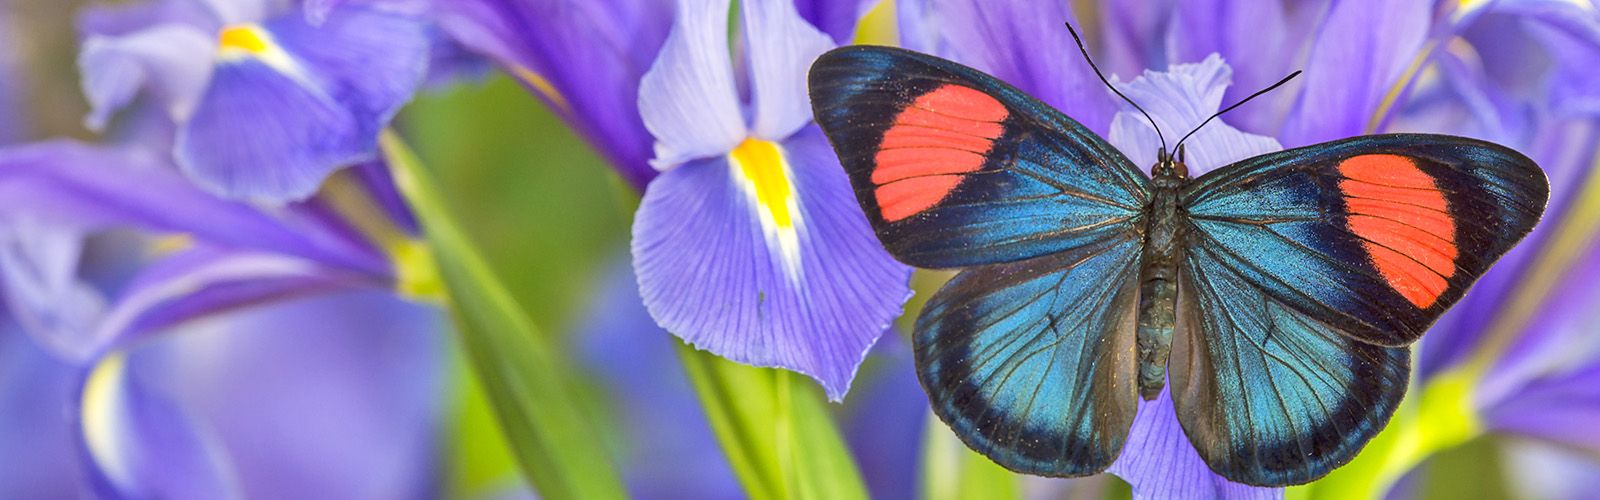 a colorful butterfly on a flower